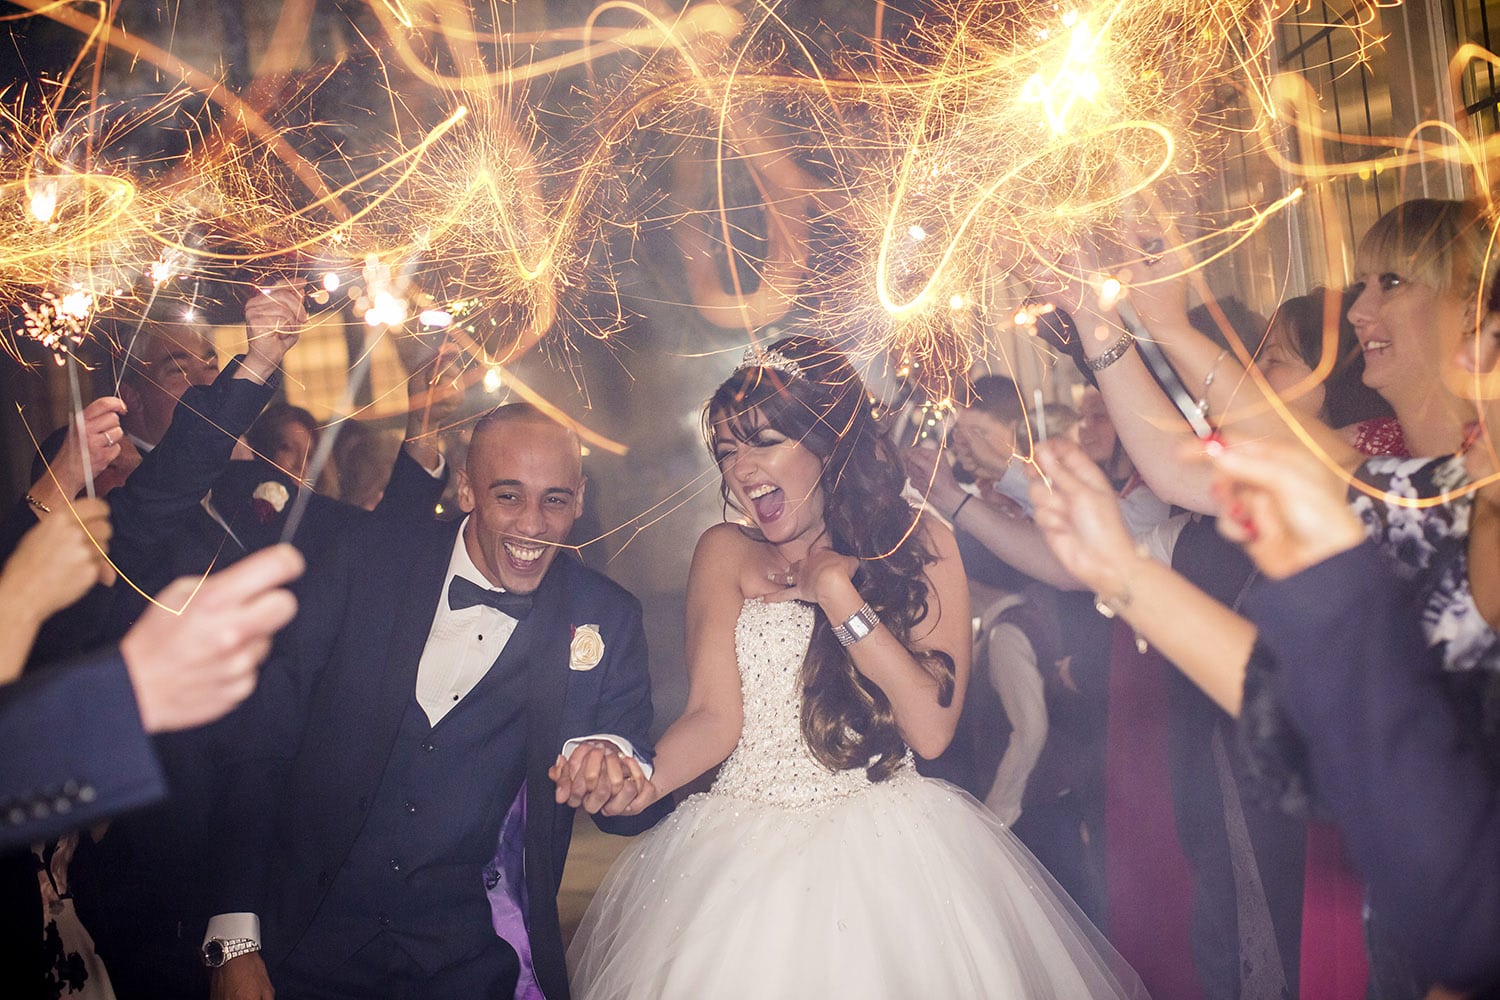 Sparklers At Weddings – Guide to getting amazing wedding photography